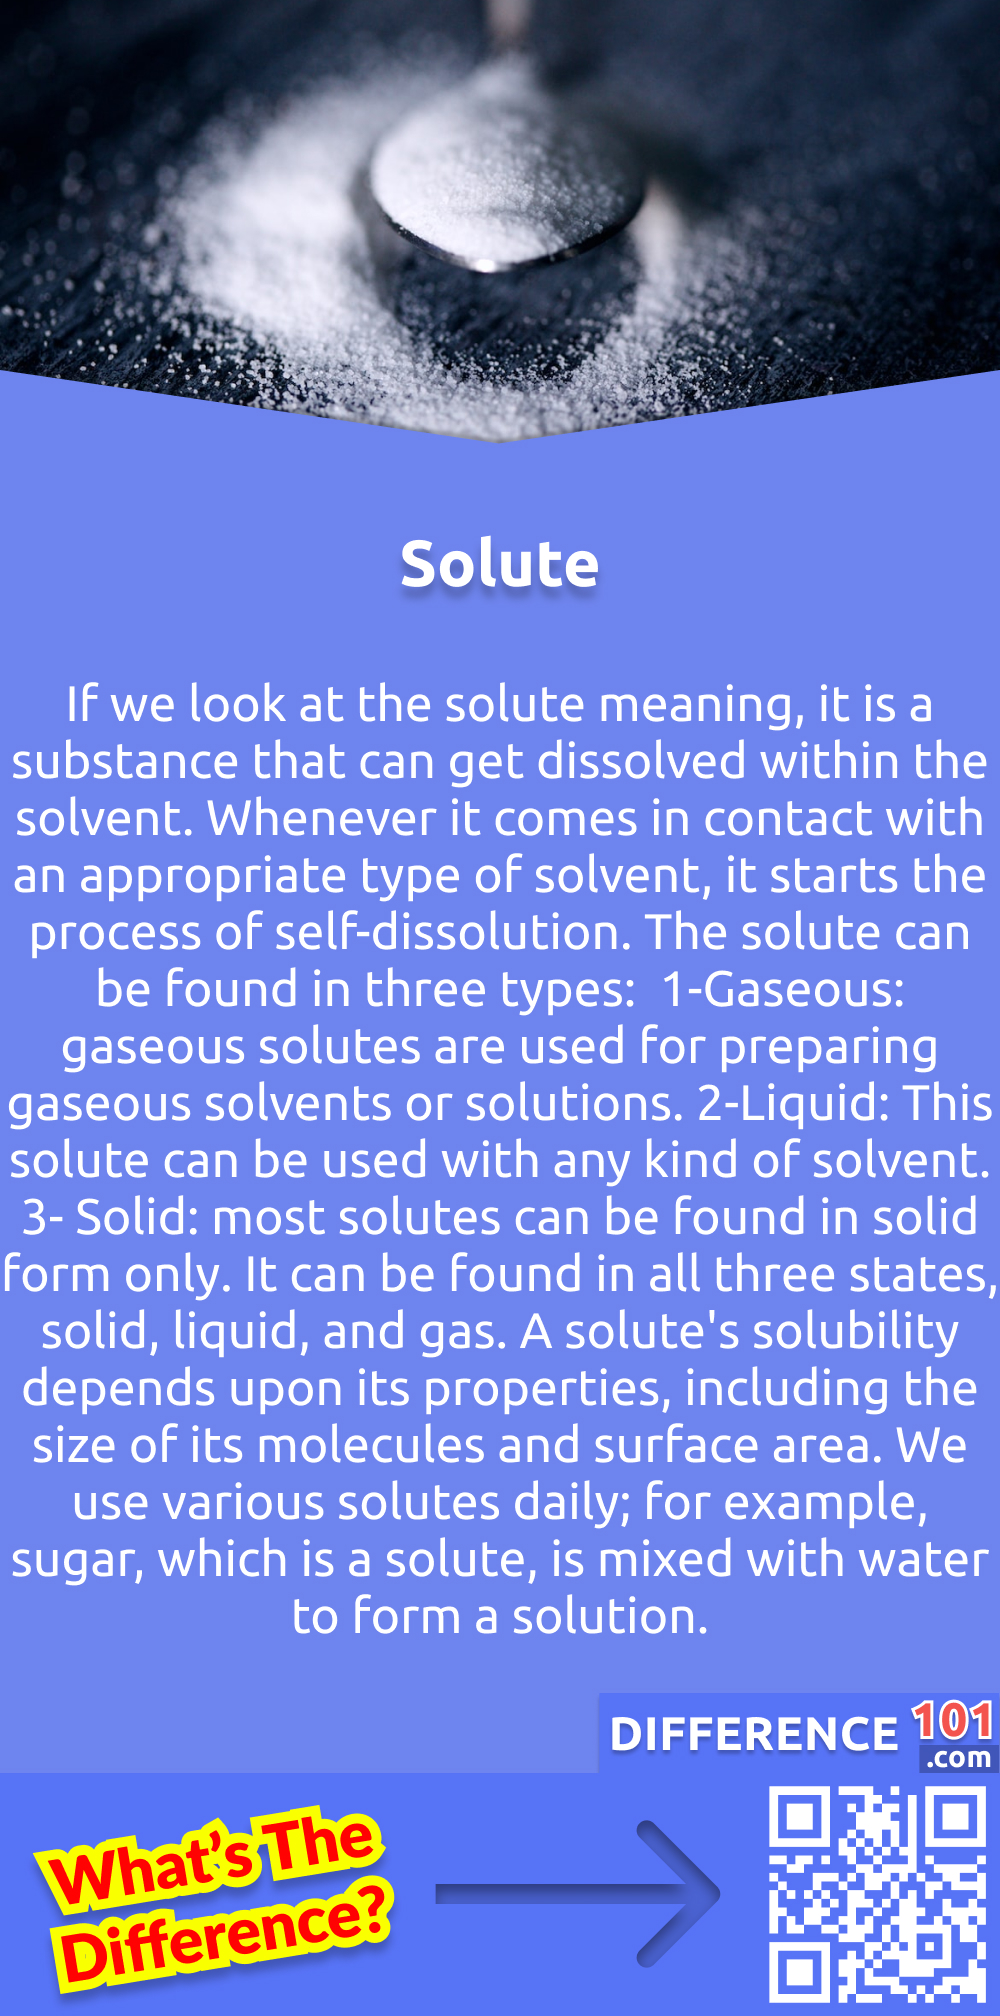 What Is Solute? If we look at the solute meaning, it is a substance that can get dissolved within the solvent. Whenever it comes in contact with an appropriate type of solvent, it starts the process of self-dissolution. The solute can be found in three types:  1-Gaseous: gaseous solutes are used for preparing gaseous solvents or solutions. 2-Liquid: This solute can be used with any kind of solvent. 3- Solid: most solutes can be found in solid form only. It can be found in all three states, solid, liquid, and gas. A solute's solubility depends upon its properties, including the size of its molecules and surface area. We use various solutes daily; for example, sugar, which is a solute, is mixed with water to form a solution.